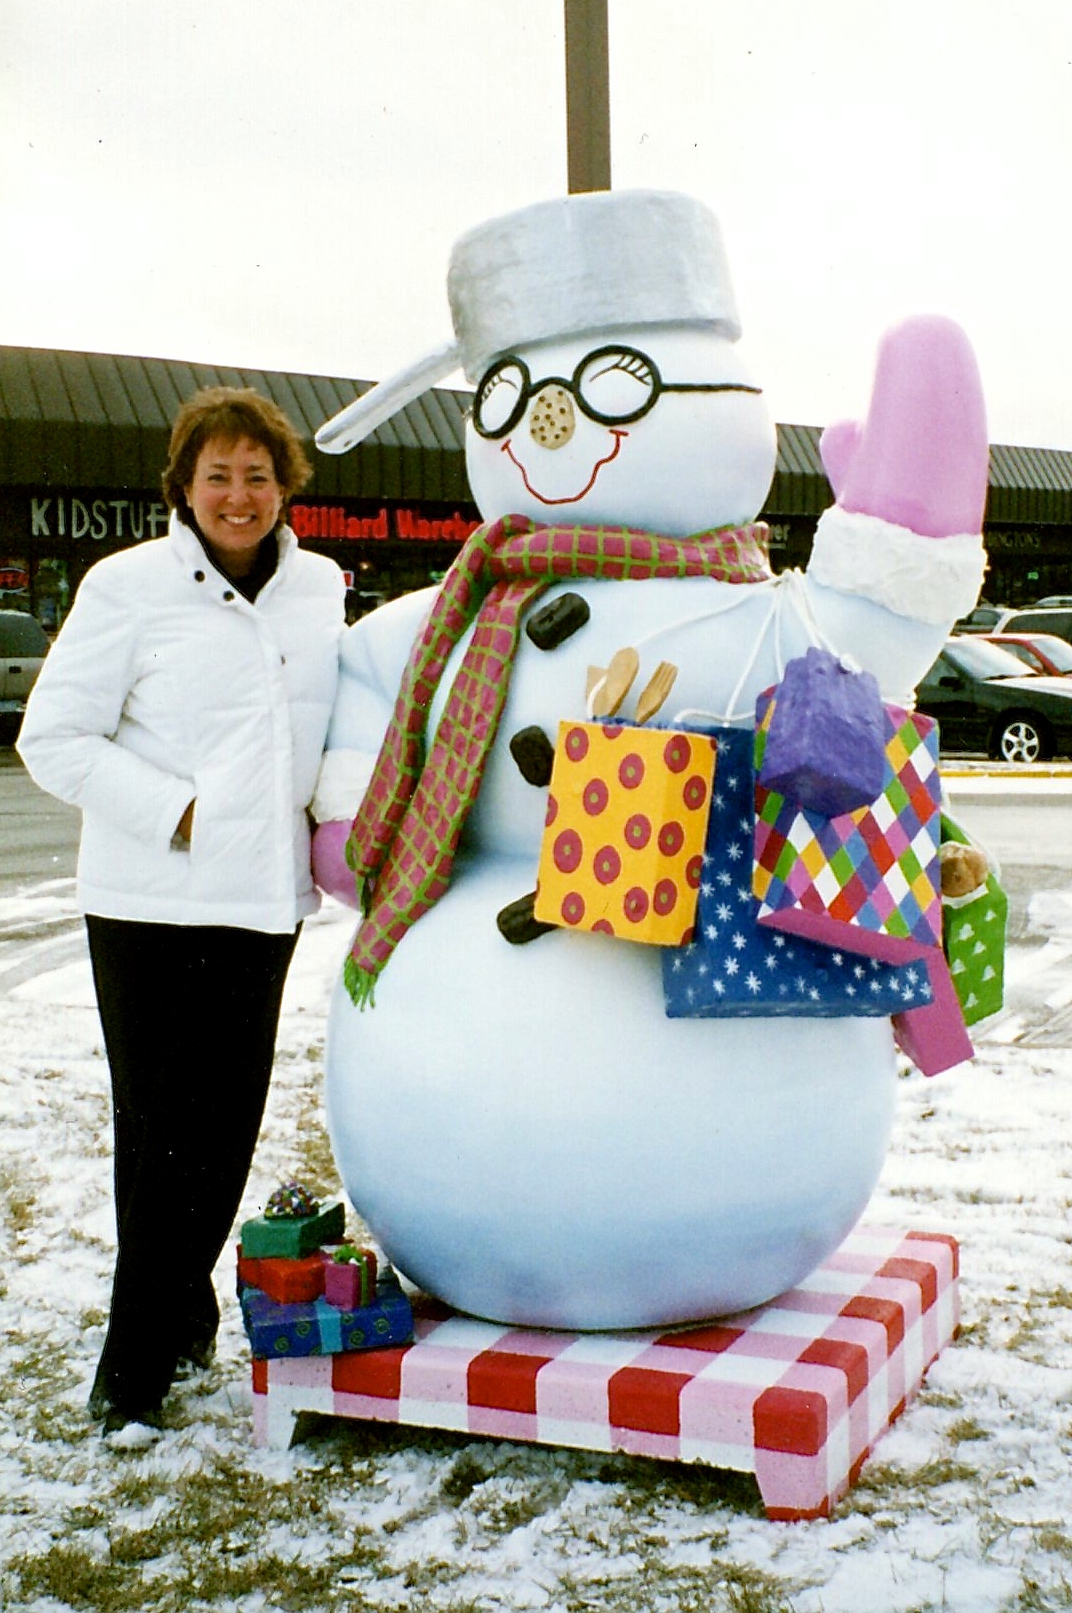 Finished Snow Woman of Sue & Toni Dachis, the designer